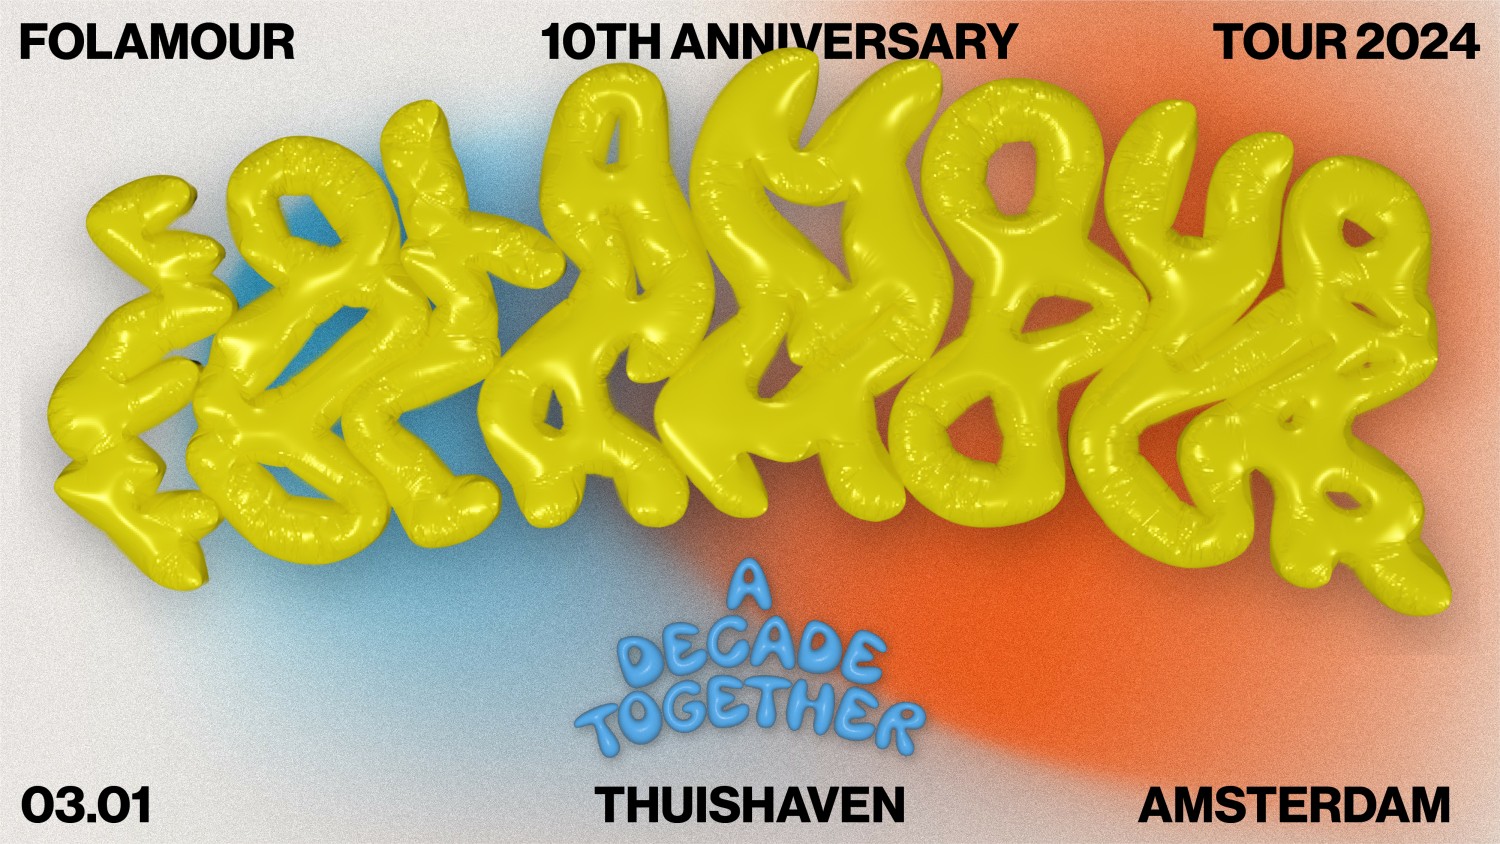 Thuishaven w/ Folamour | A Decade Together